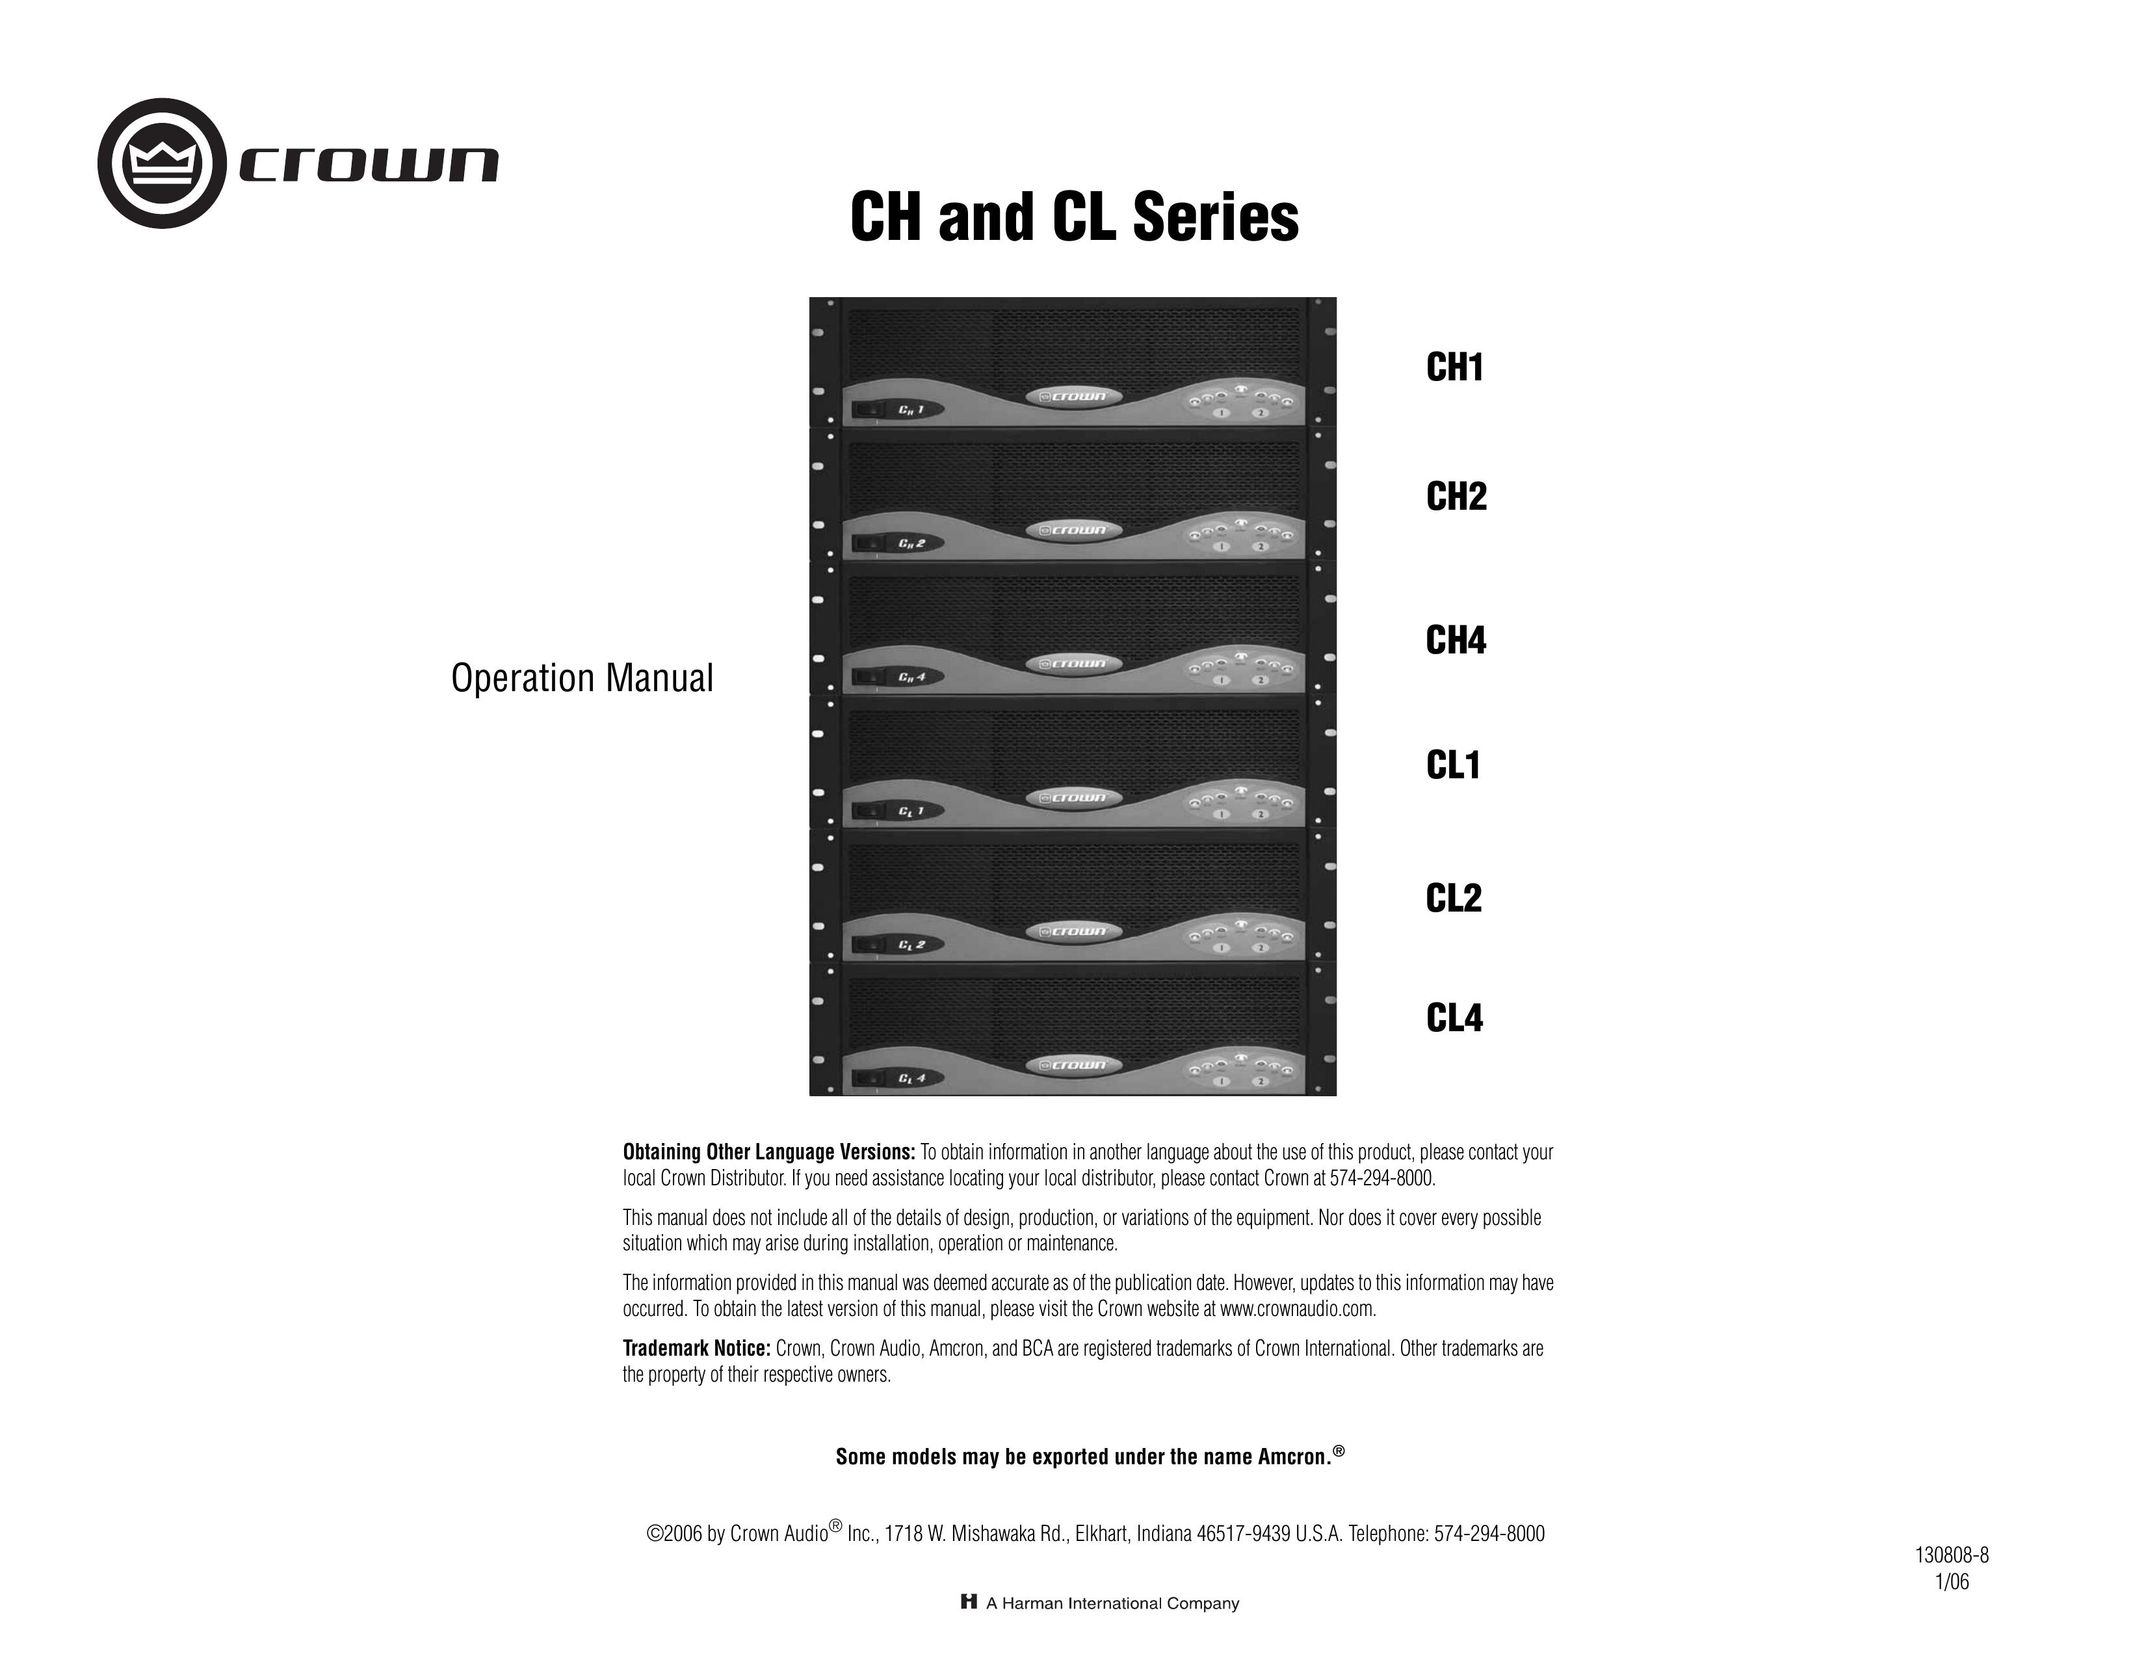 Crown Audio CL Series Stereo Amplifier User Manual